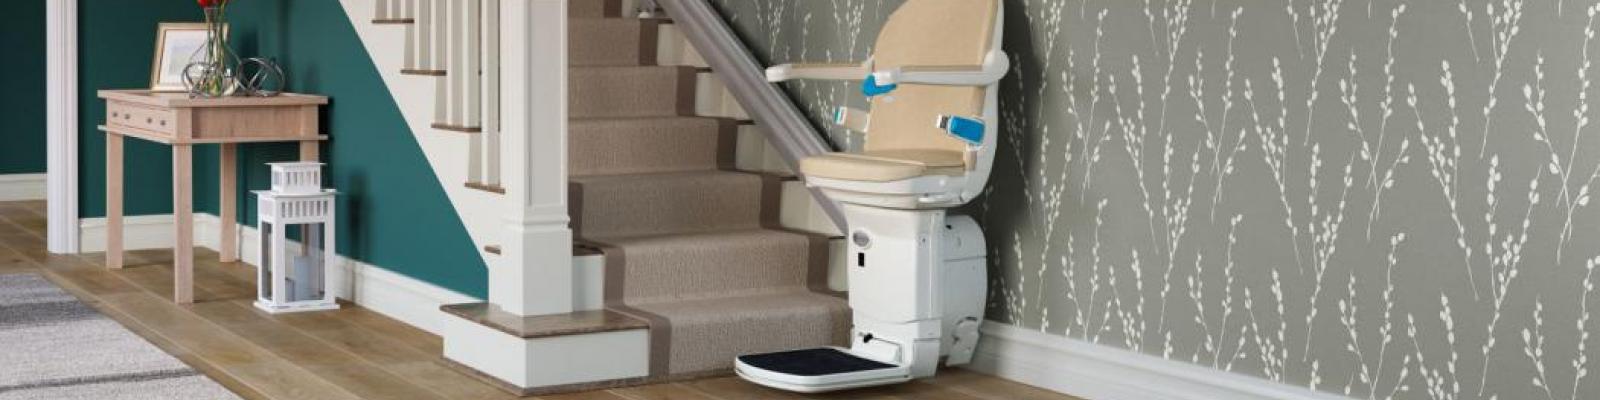 Superglide Stairlifts Stairlift on the Stairs 